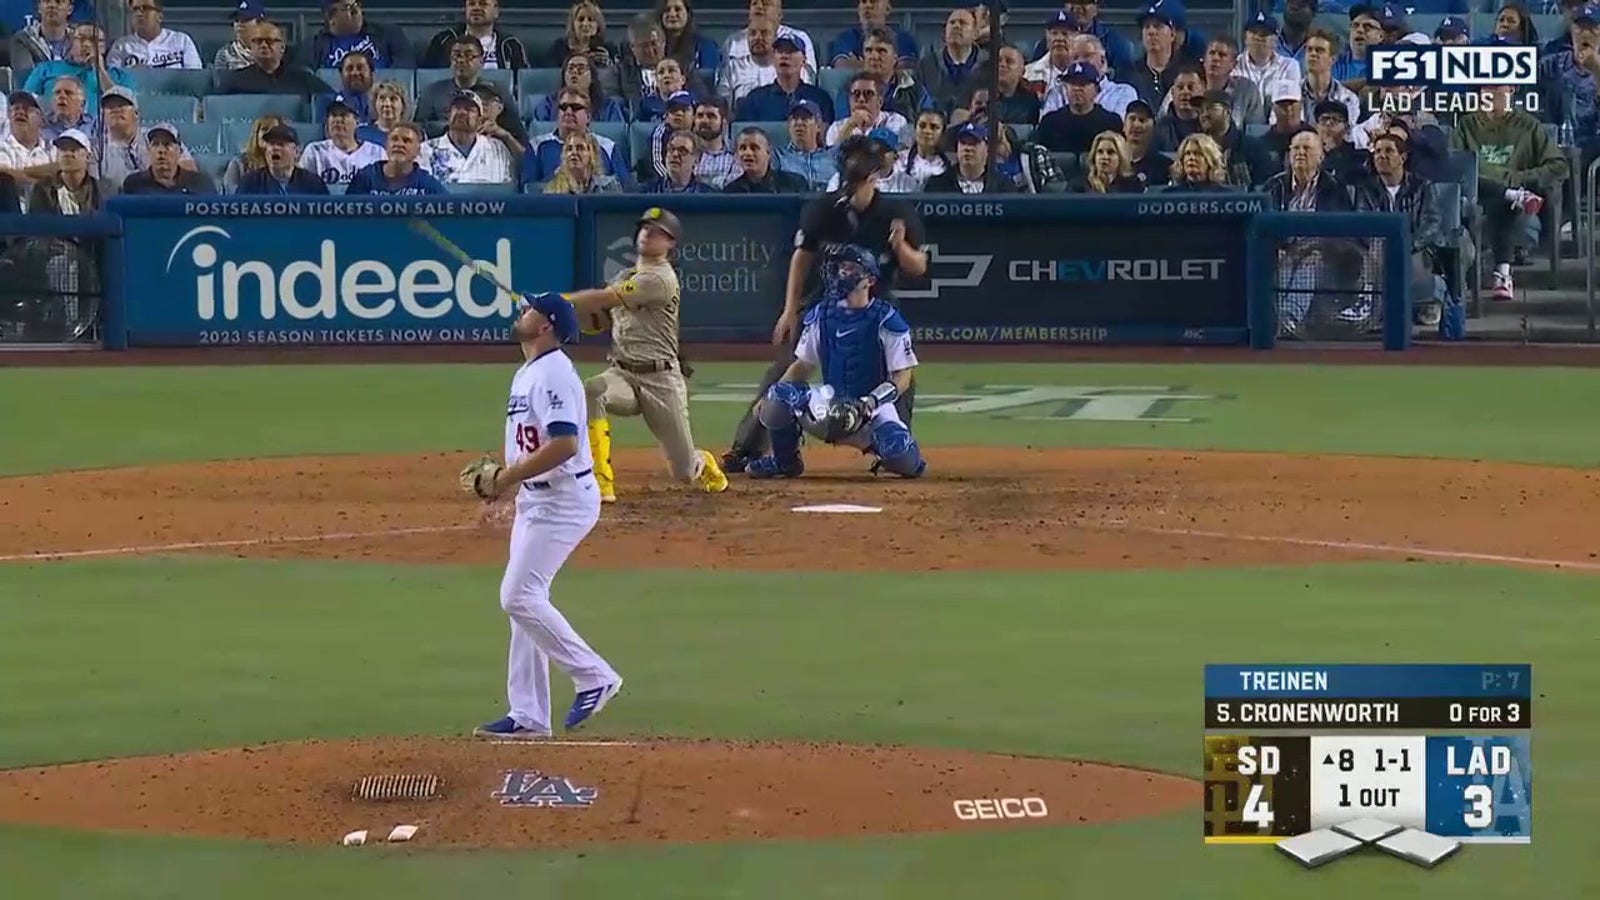 Padres' Jake Cronenworth blasts a home run to deep right field to extend lead over the Dodgers